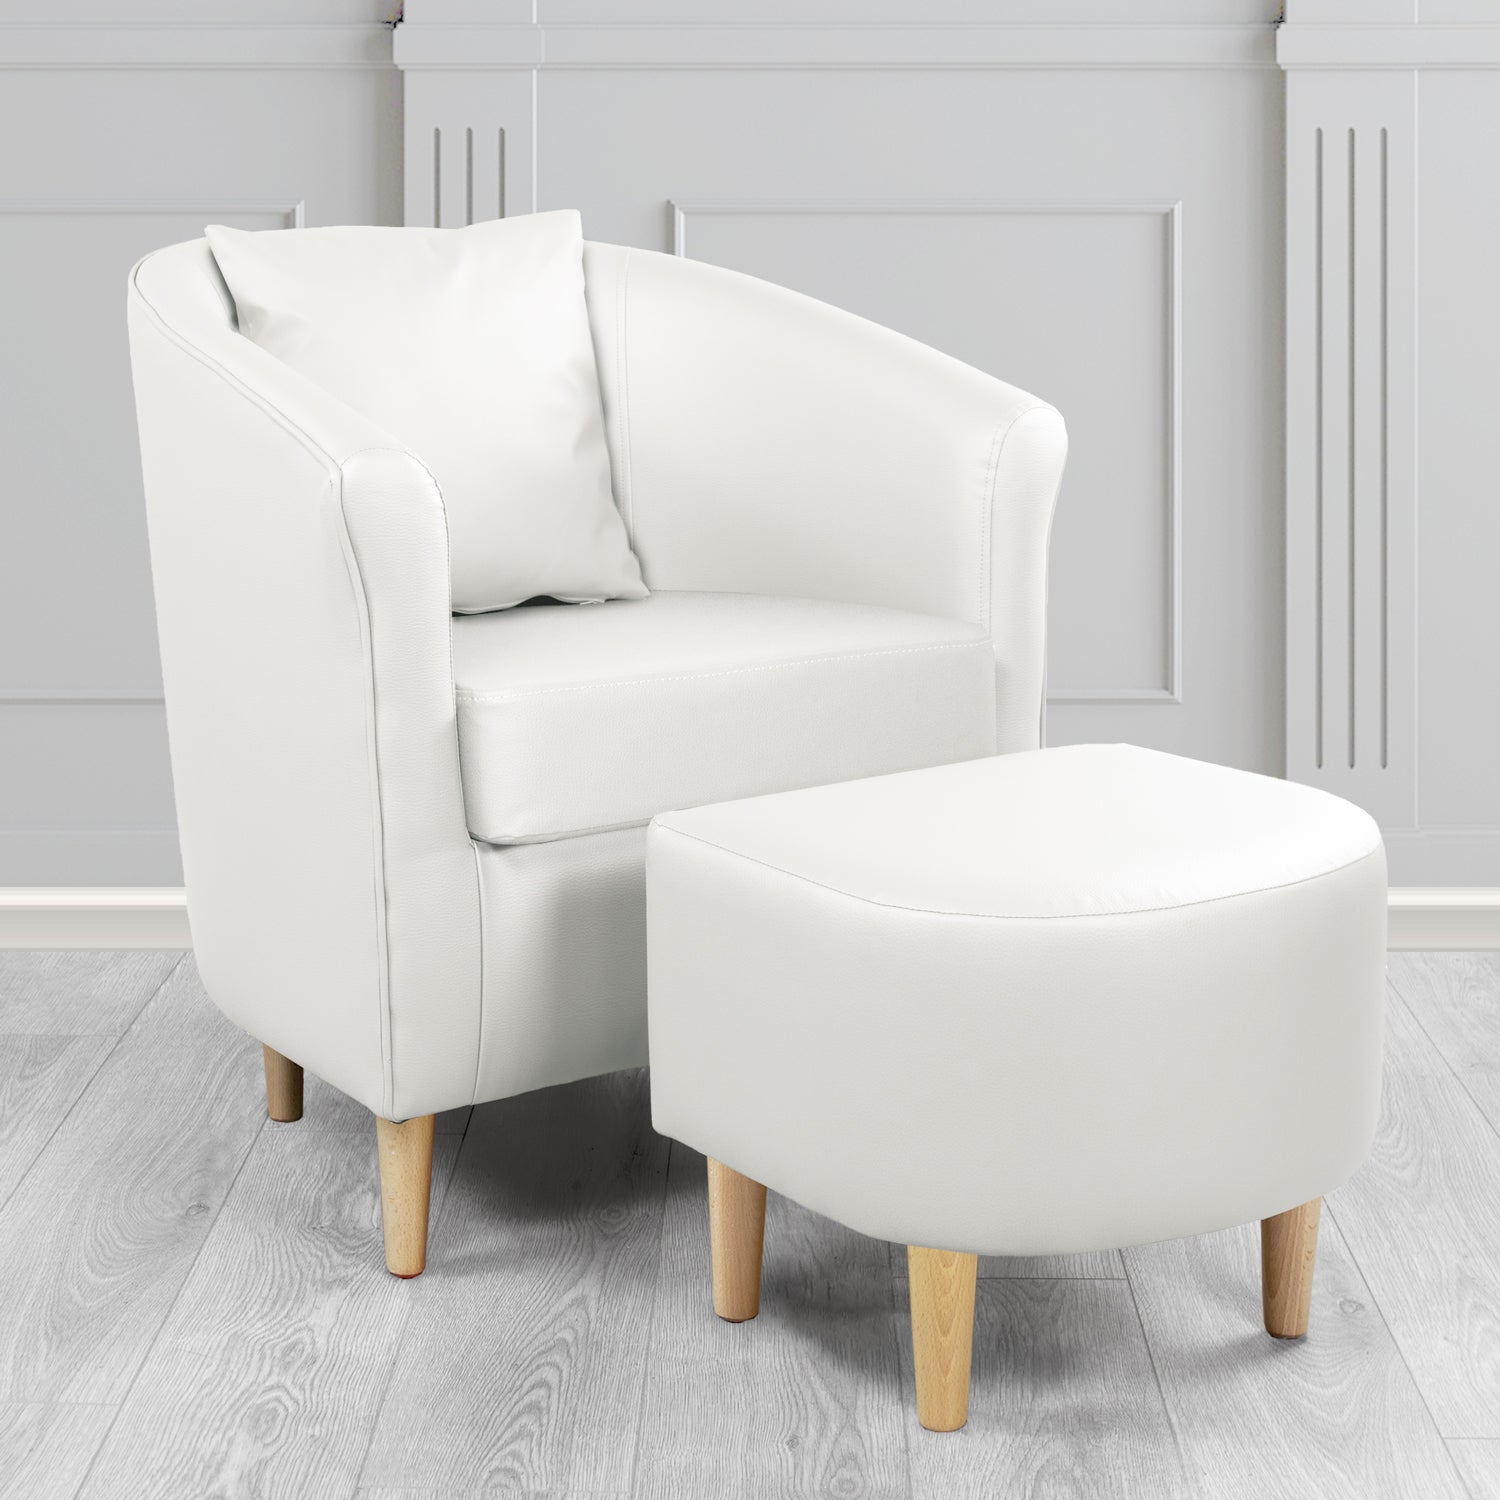 St Tropez Tub Chair with Footstool Set in Madrid White Faux Leather - The Tub Chair Shop